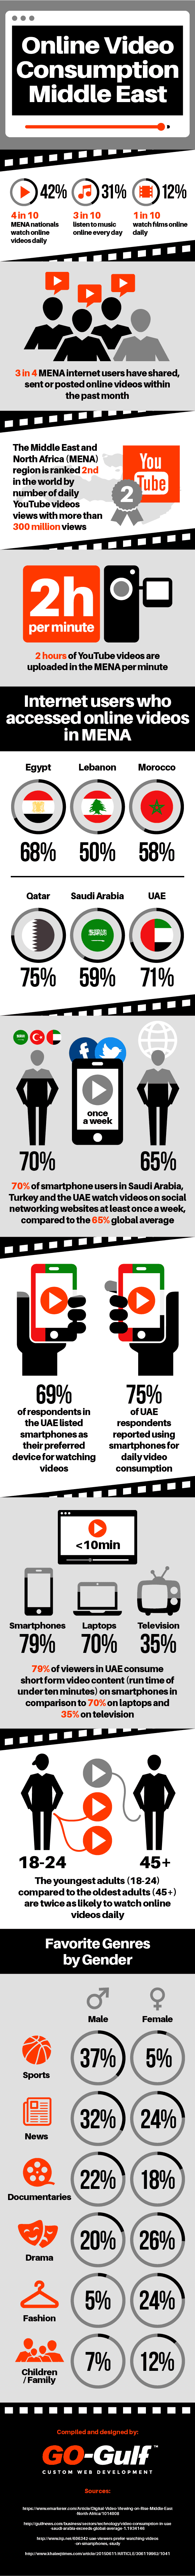 Online Video Consumpttion in Middle East Infographic